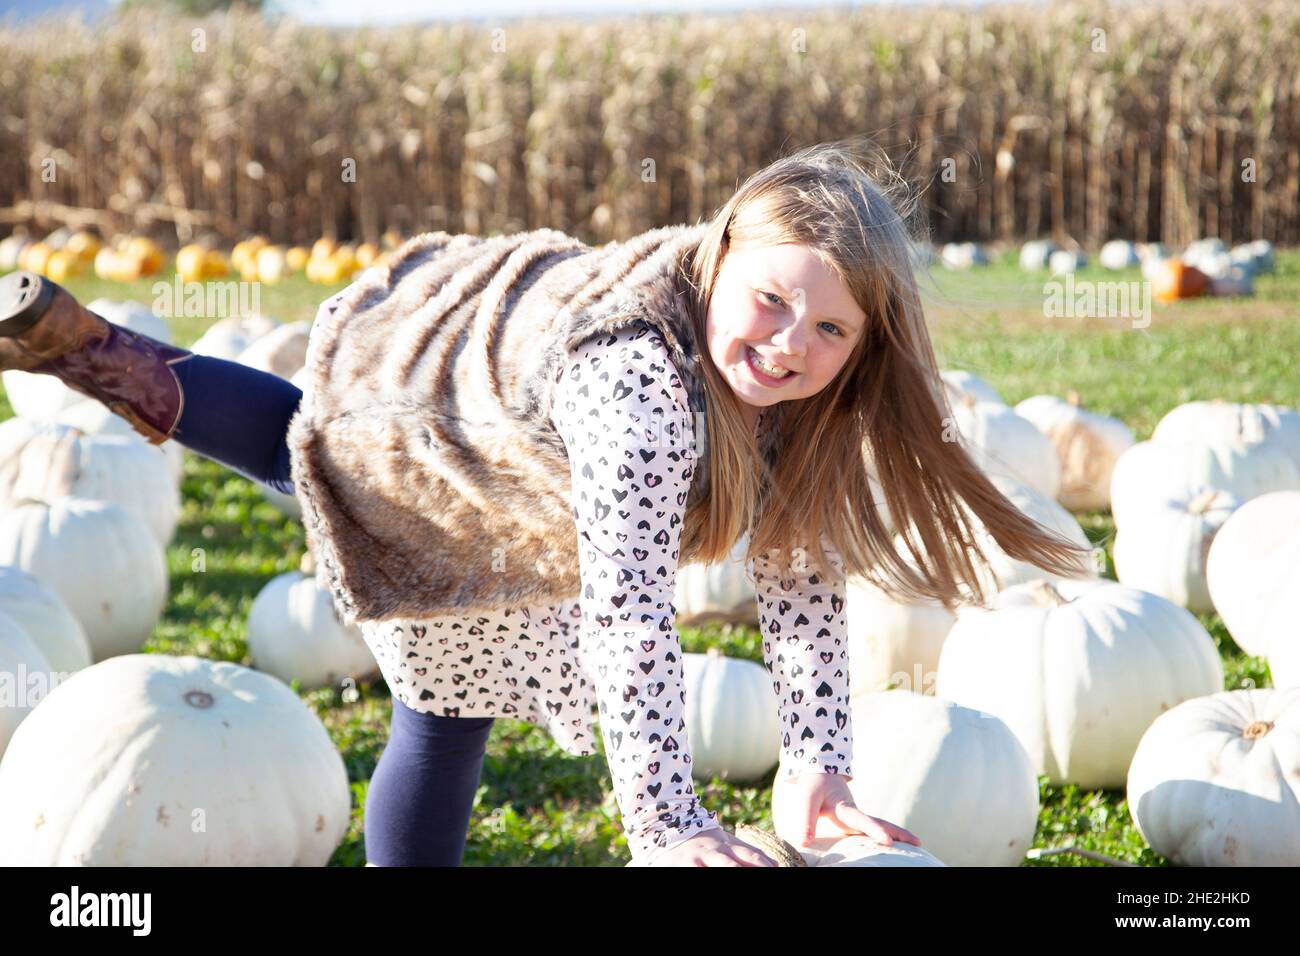 smiling young girl goofing around on a bunch of white pumpkins in a field Stock Photo